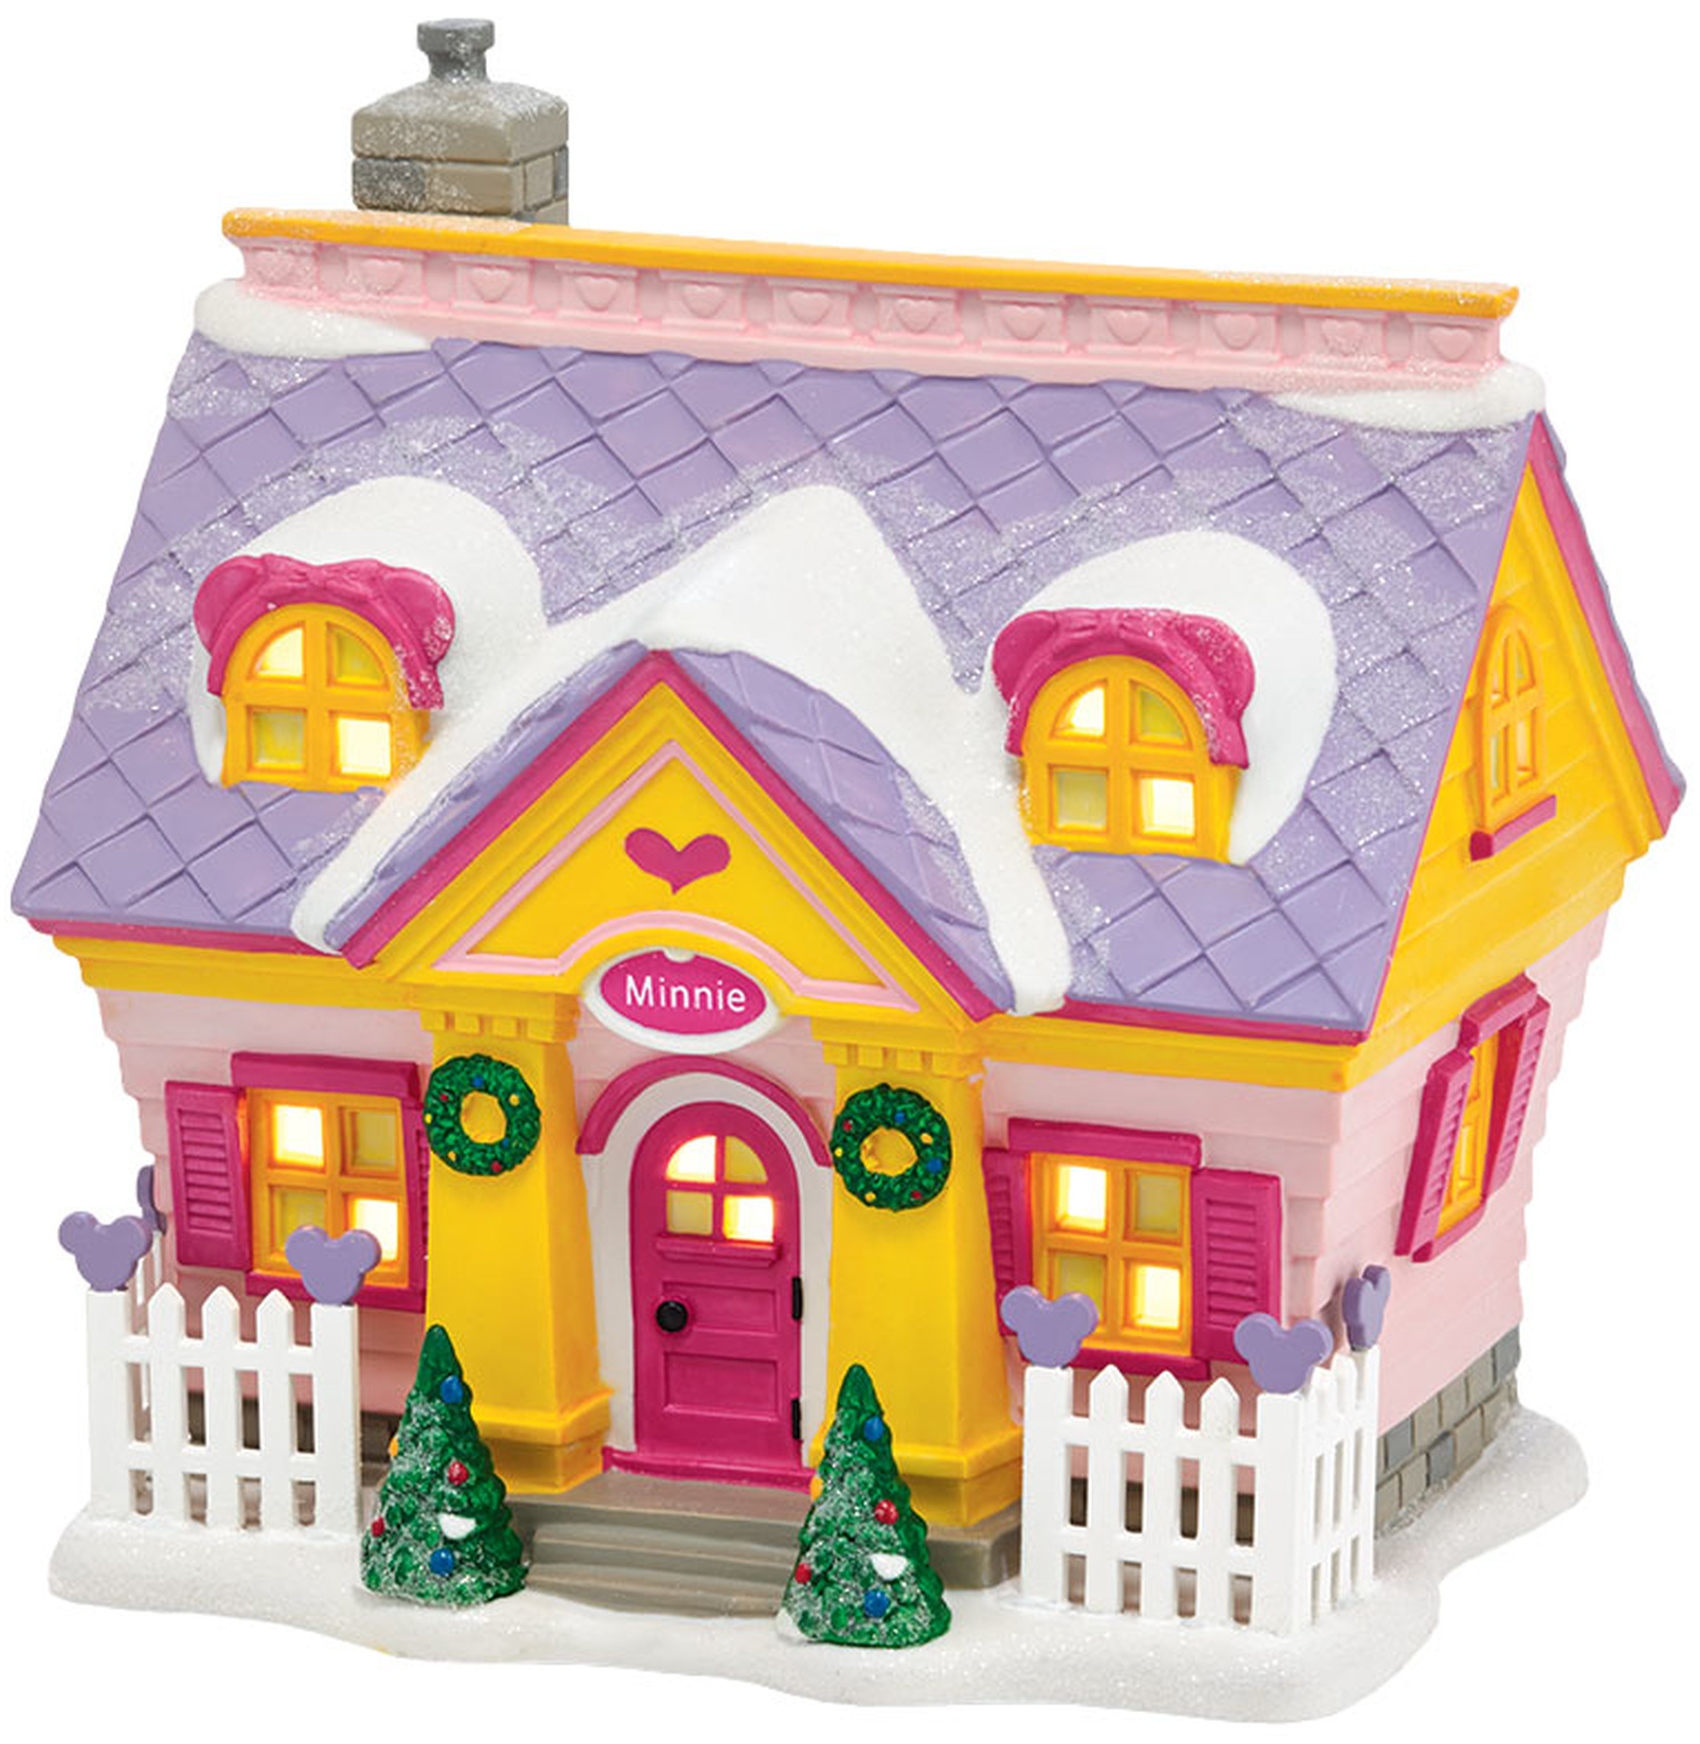 Disney by Department 56 4038631 Minnie's House